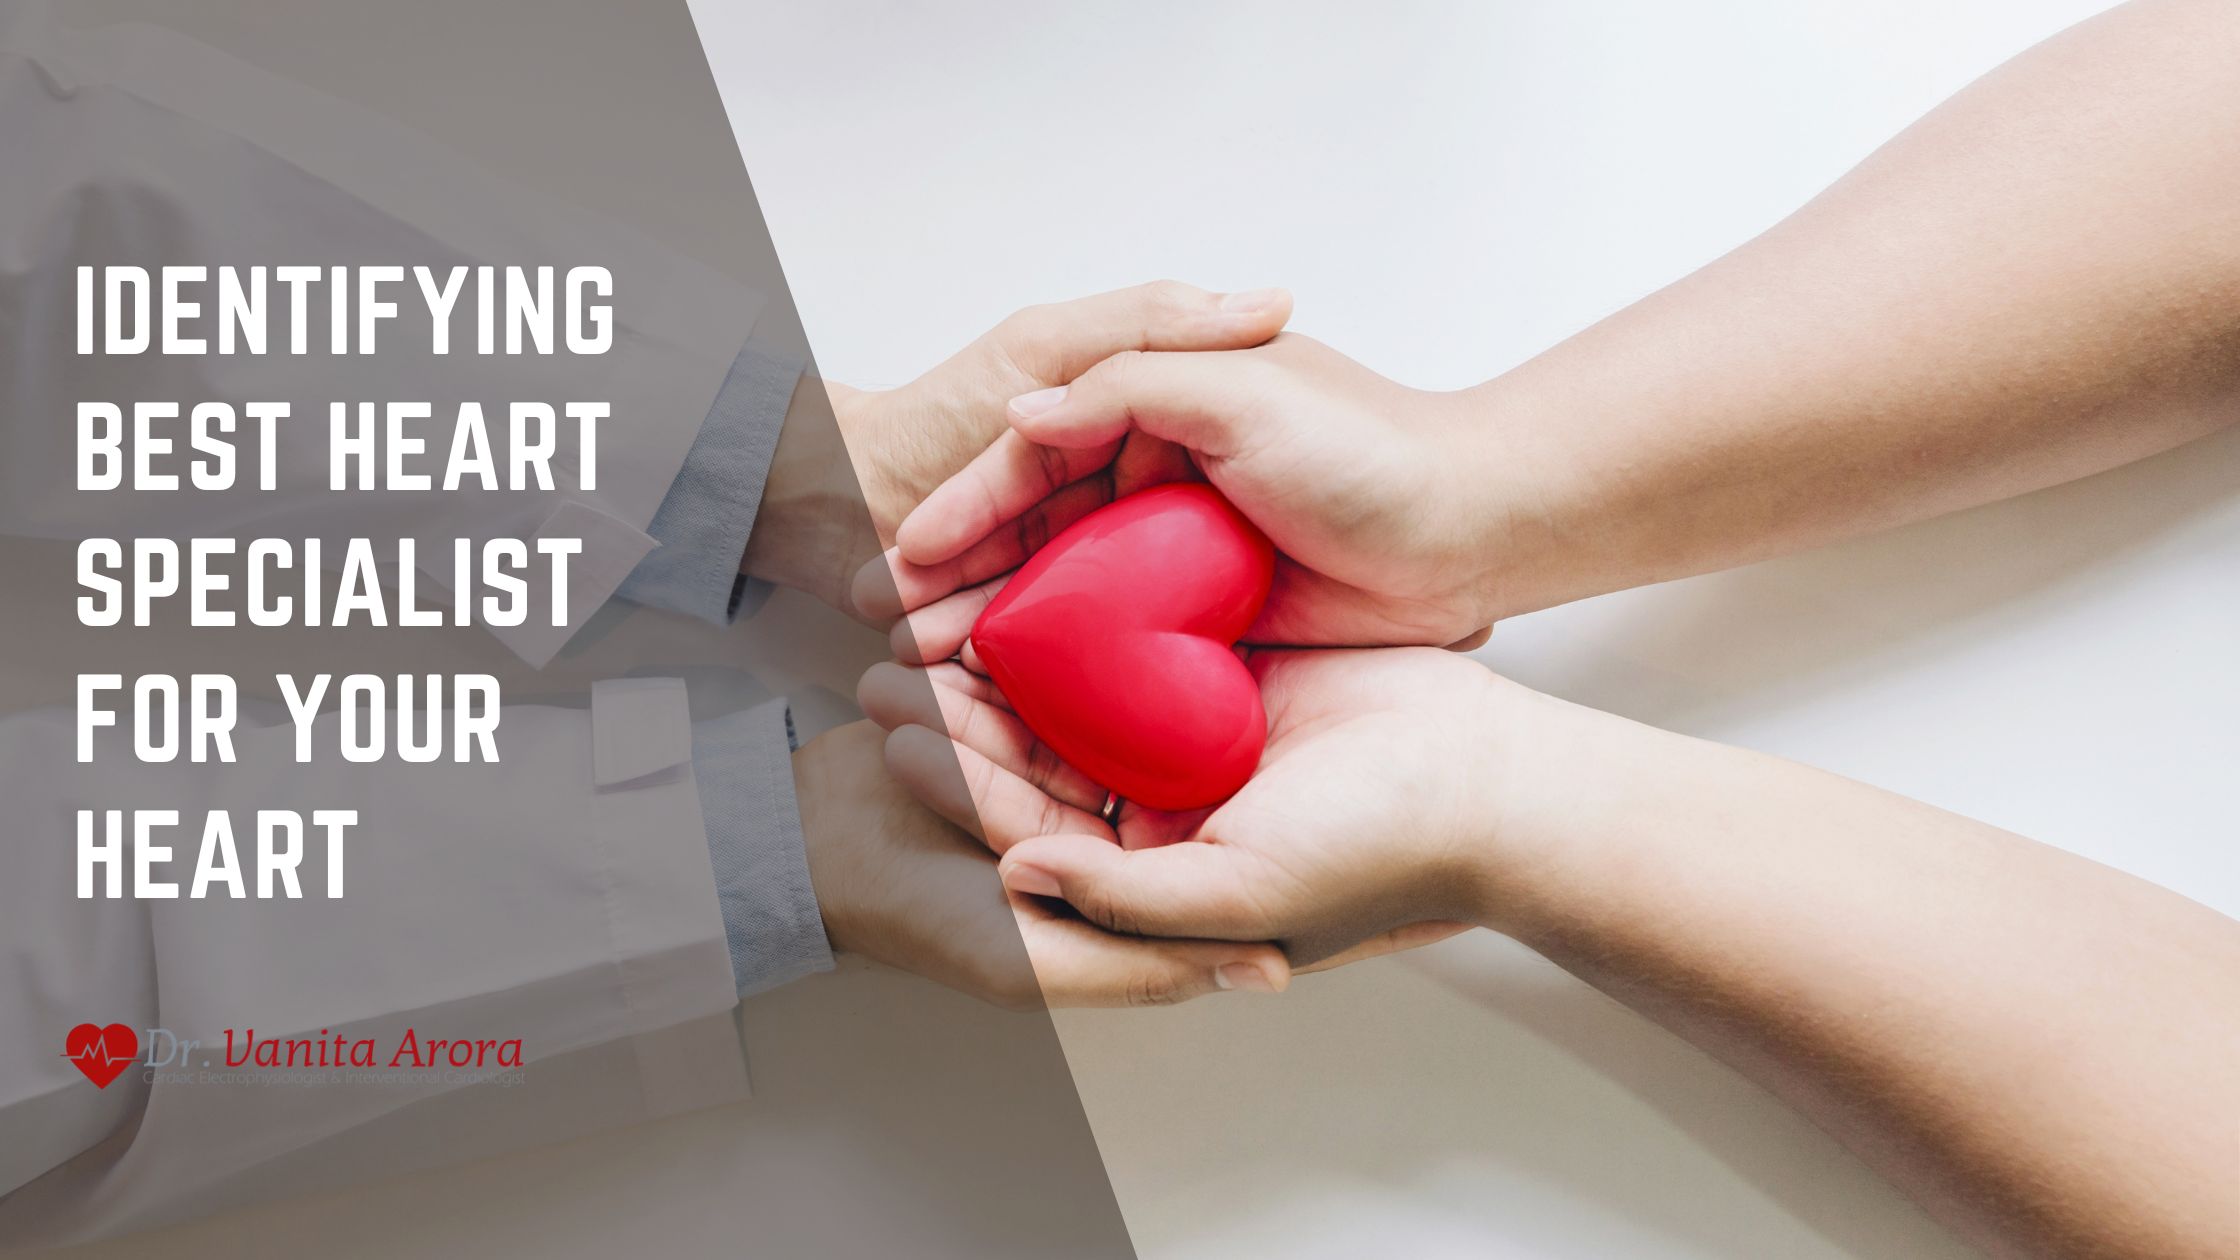 Identifying Best Heart Specialist for Your Heart